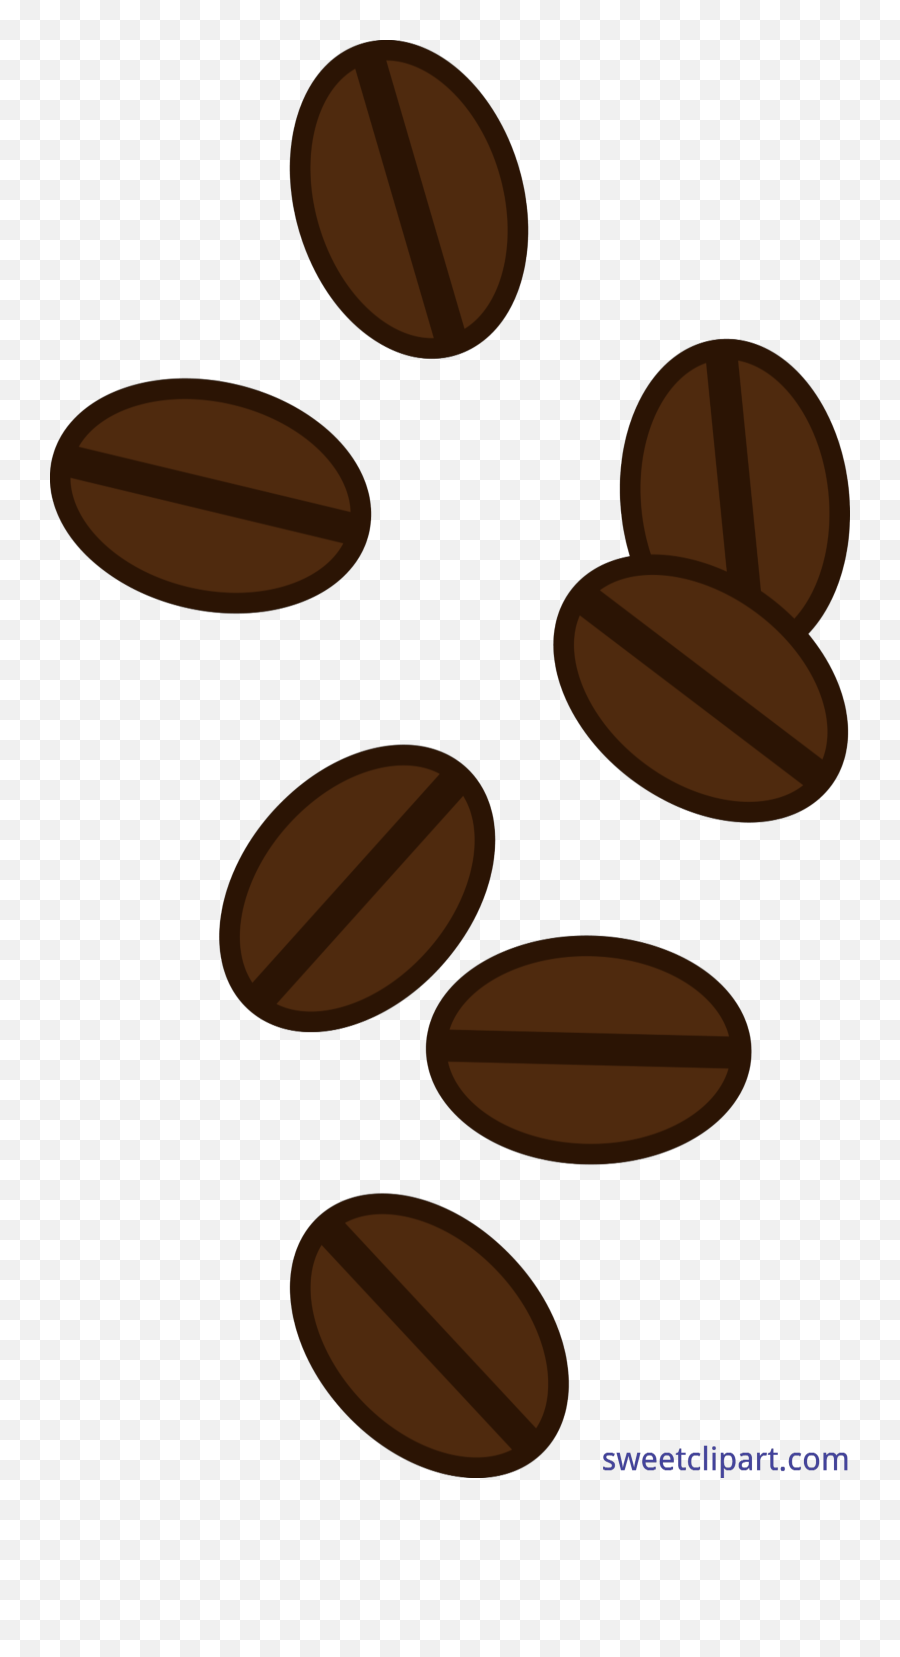 Coffee Clipart 4 - Transparent Background Coffee Beans Clipart Emoji,Coffee Clipart